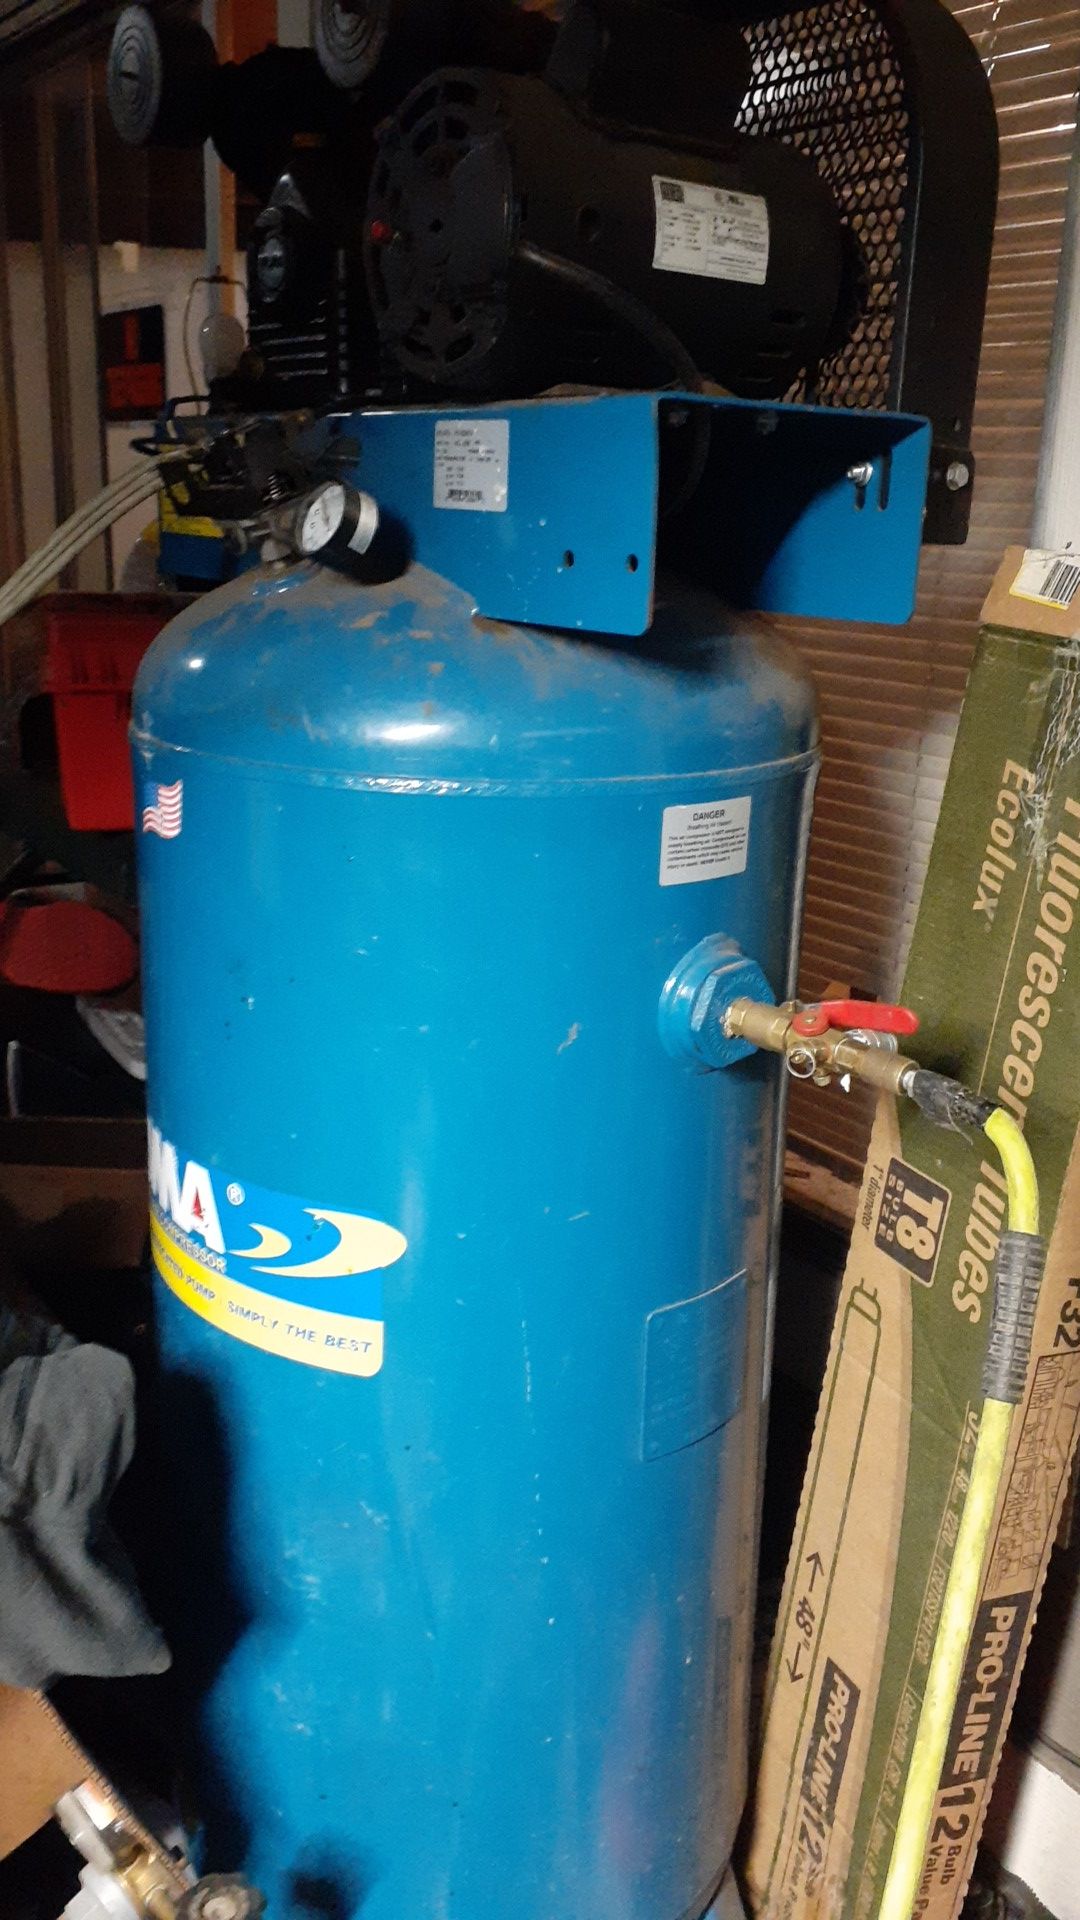 Puma industrial air compressor model PK-6060V if I dont sell it by the end of day (10-21- 19) it's going Into my storage